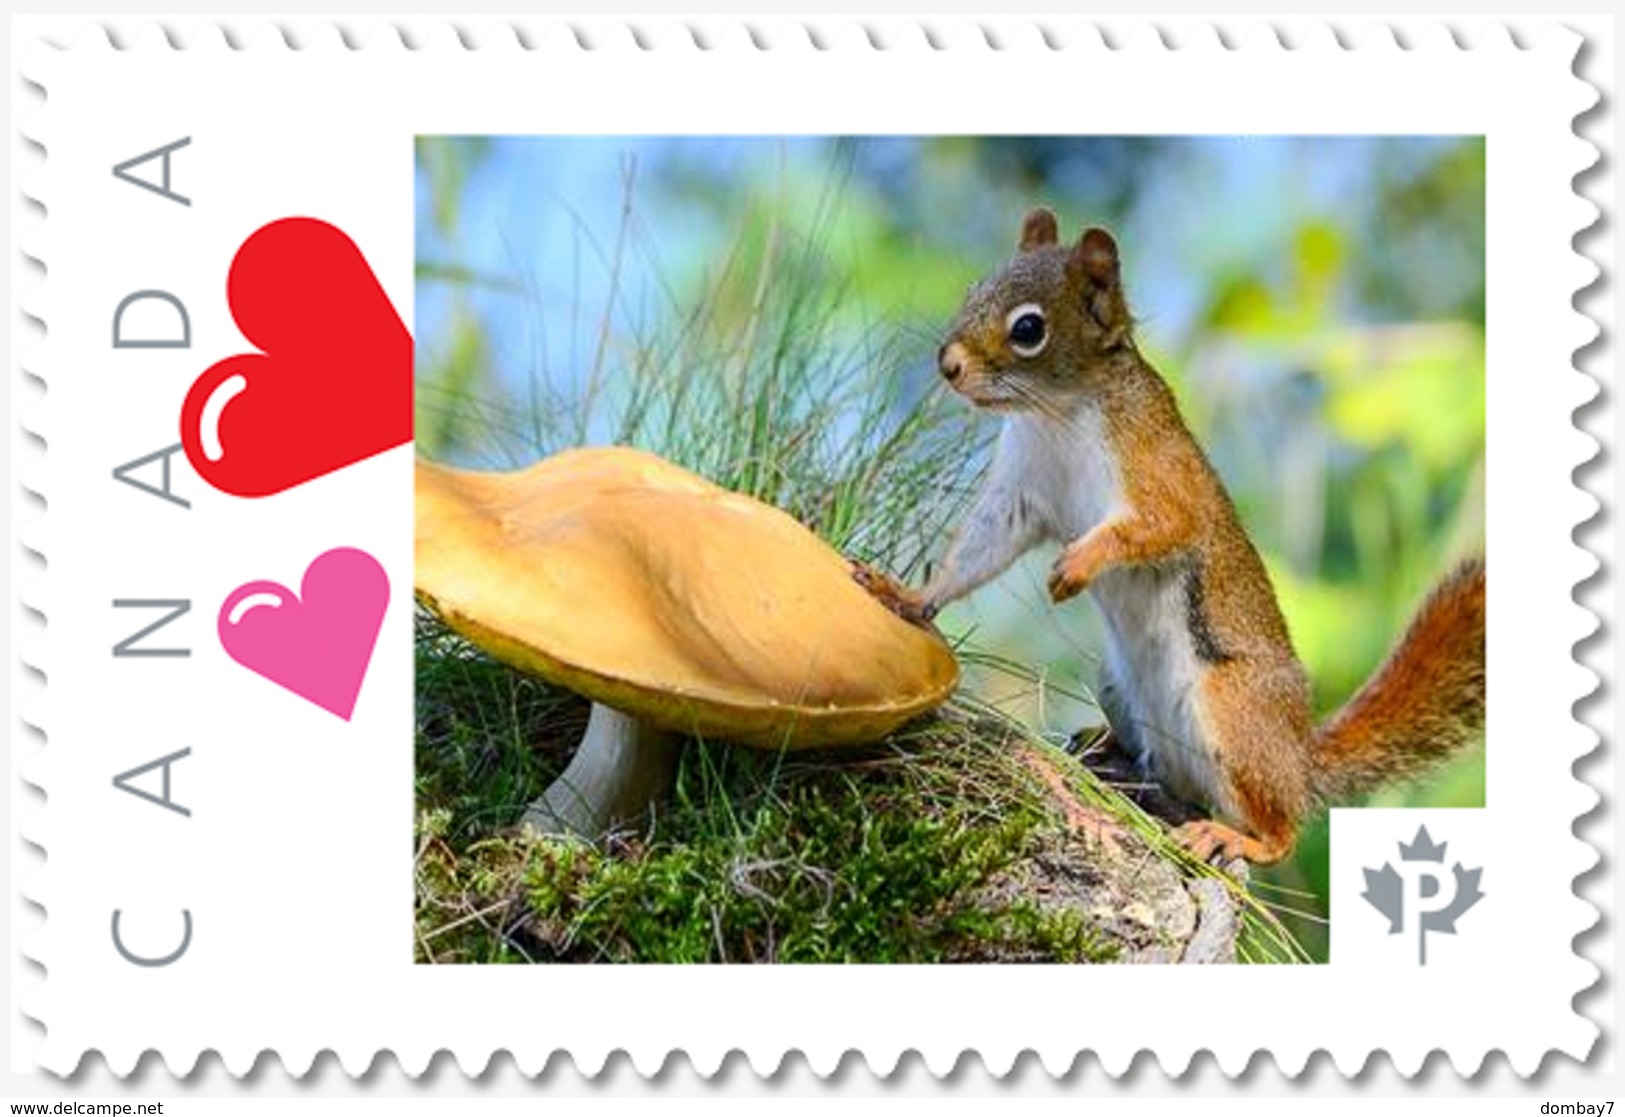 SQUIRREL And MUSHROOM = Picture Postage MNH-VF+ Canada 2019 [p19-04s10] - Funghi